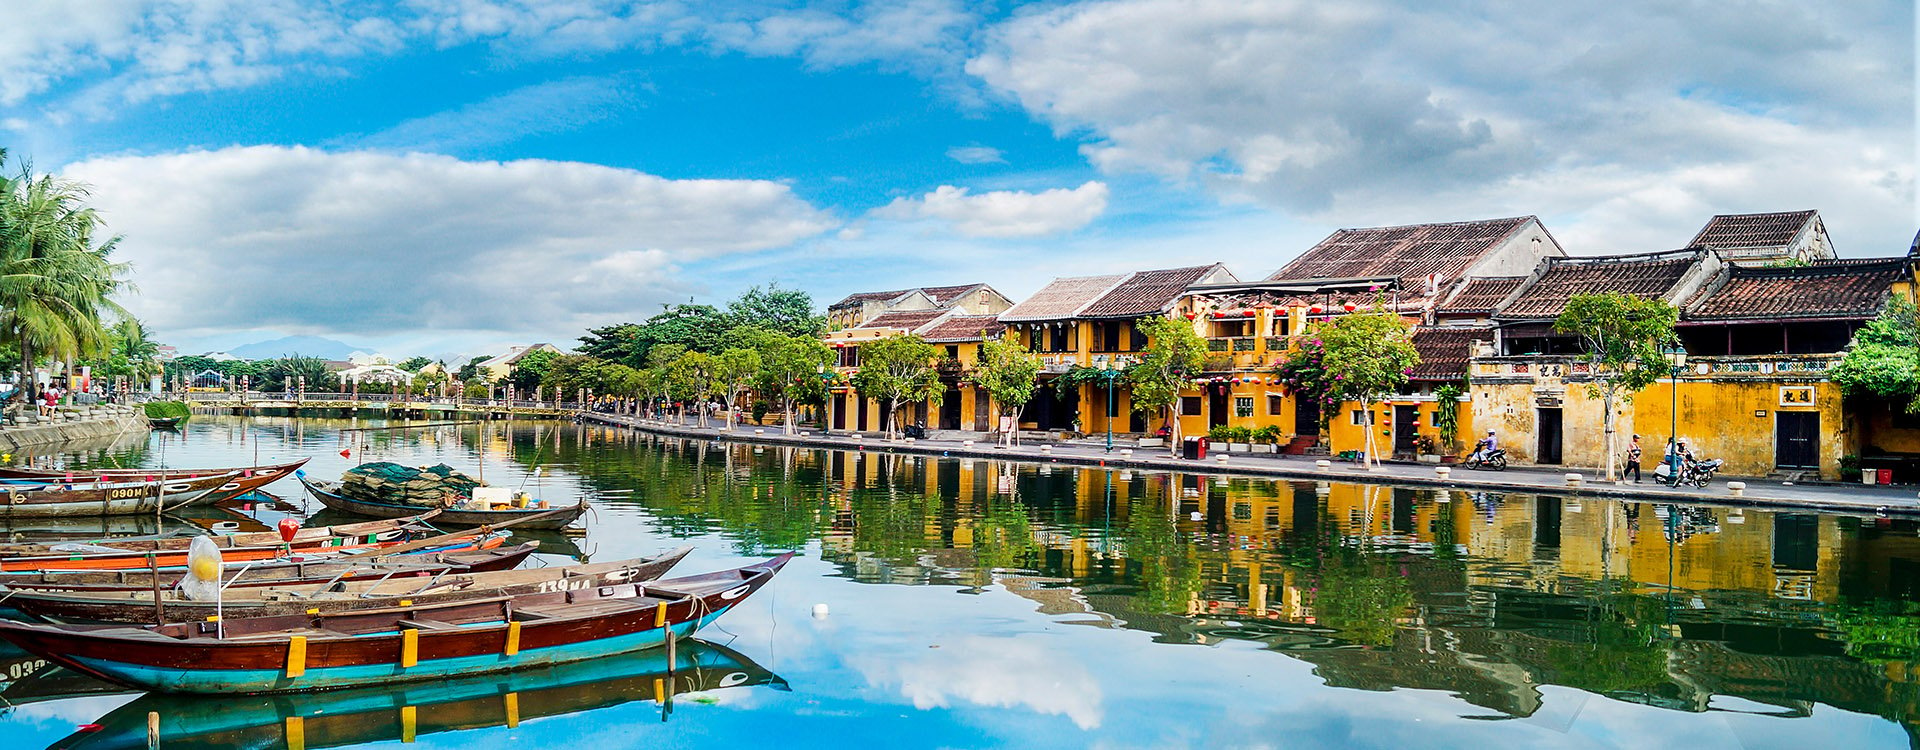 Hoi An river, Vietnam Cultural yellow heritage site of mixed cultures and architecture